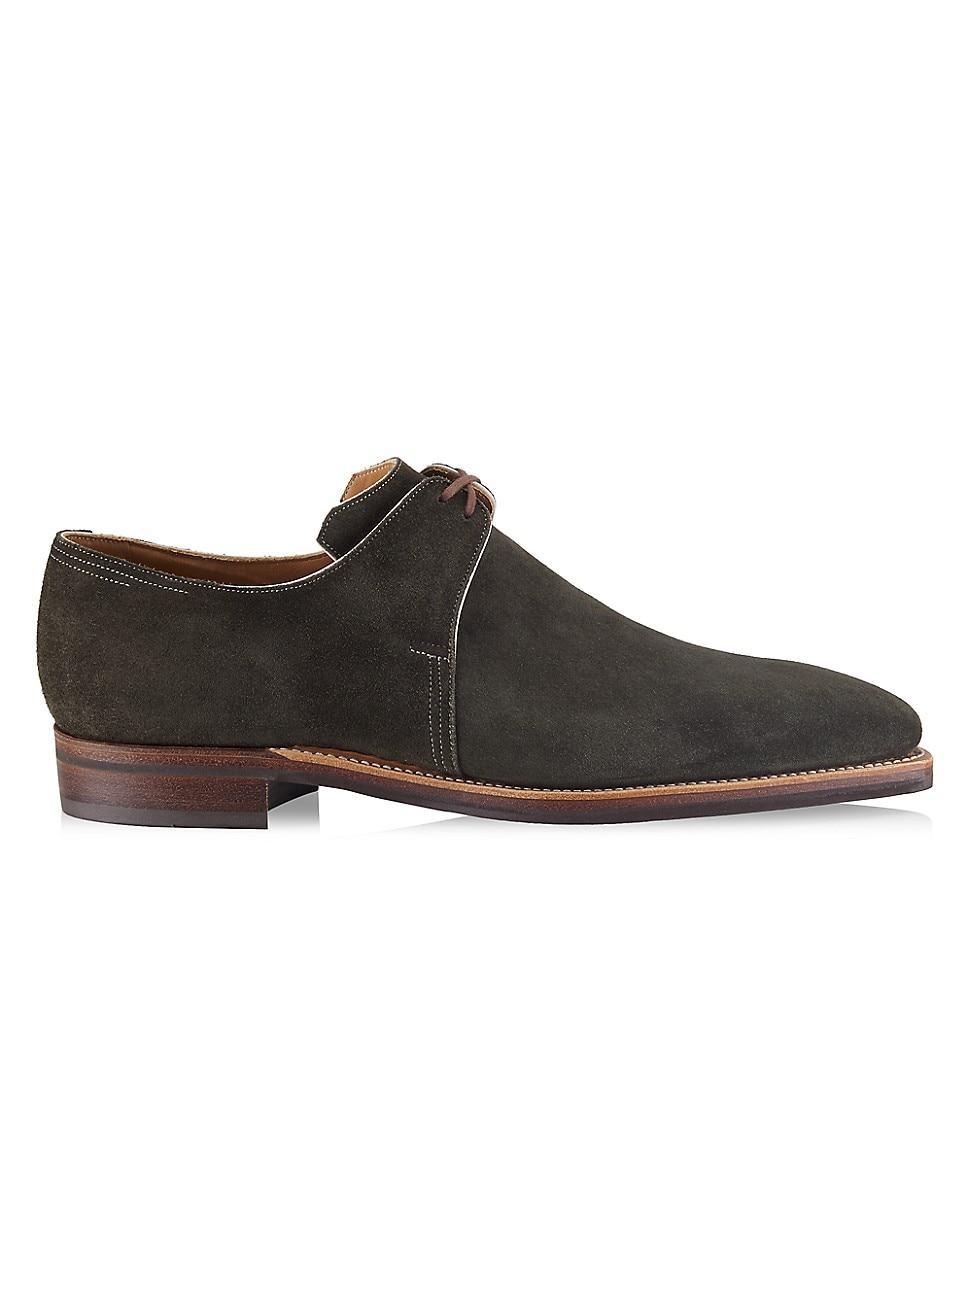 Mens Arca Pullman Lace-Up Suede Shoes Product Image